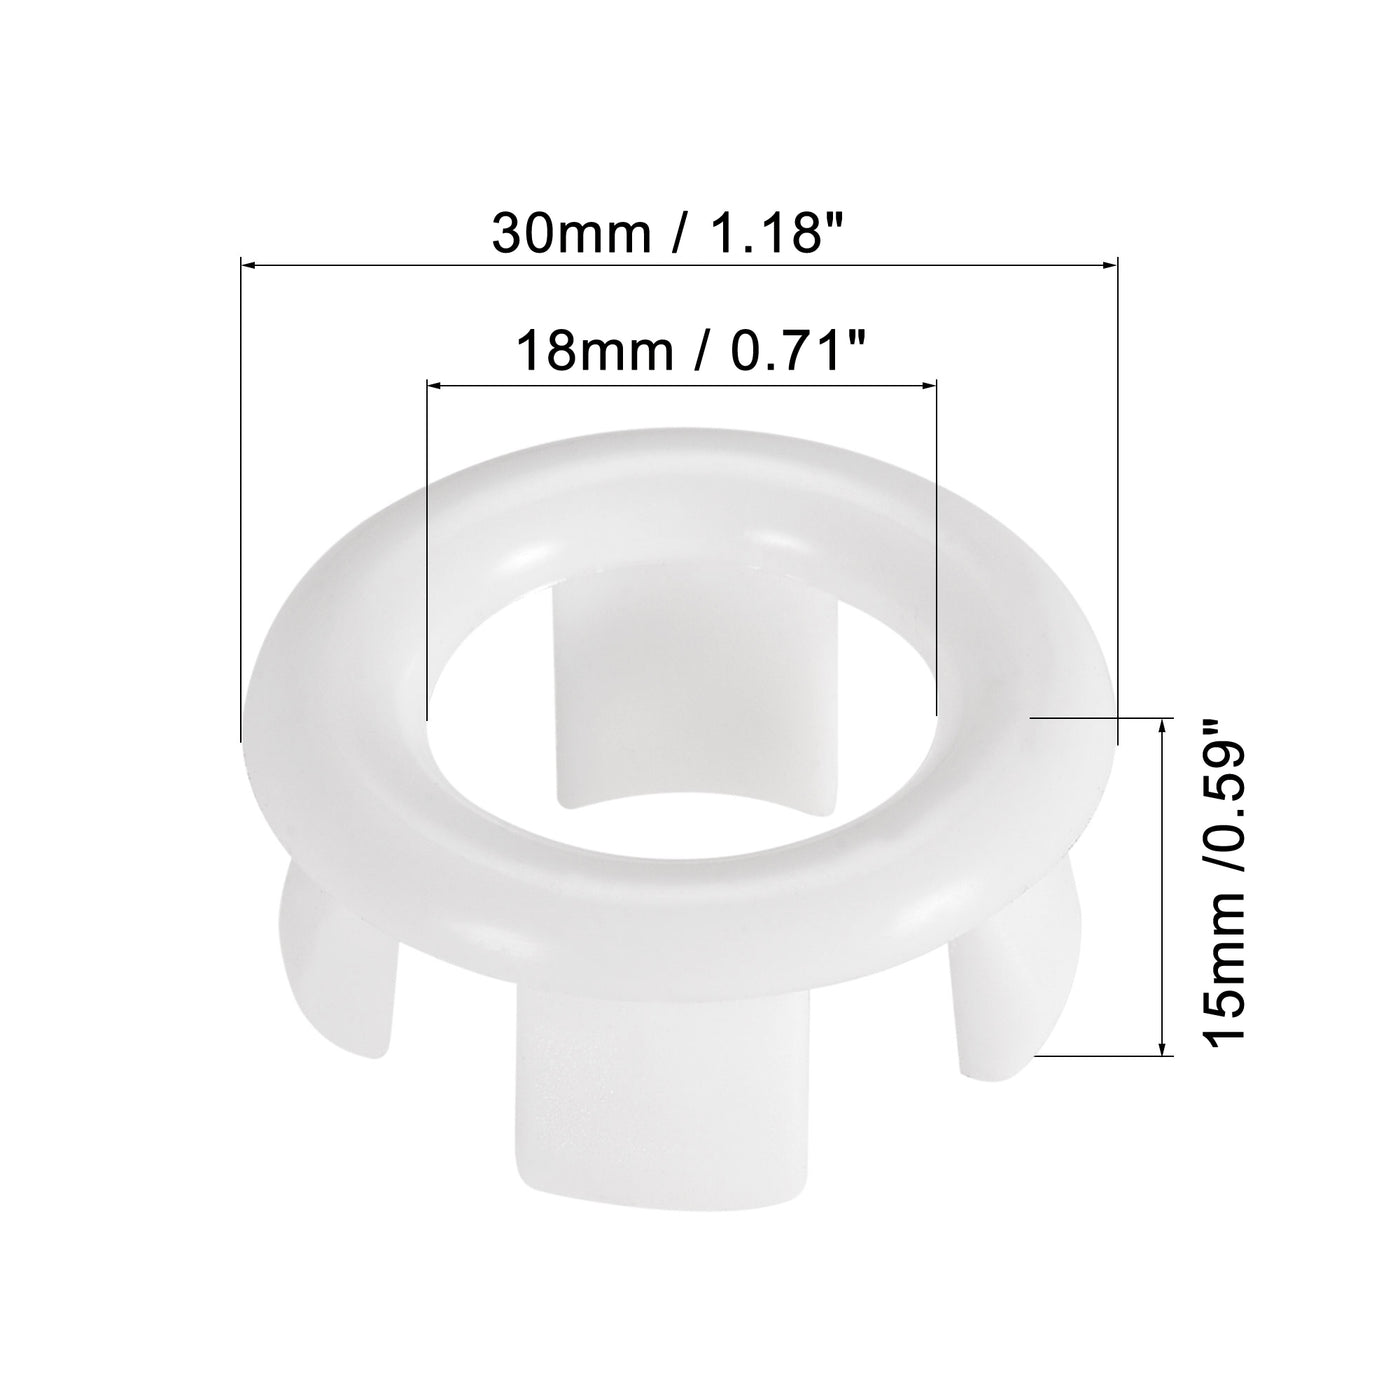 uxcell Uxcell Sink Basin Trim Overflow Cover Insert in Hole Ring Covers Caps White 12pcs